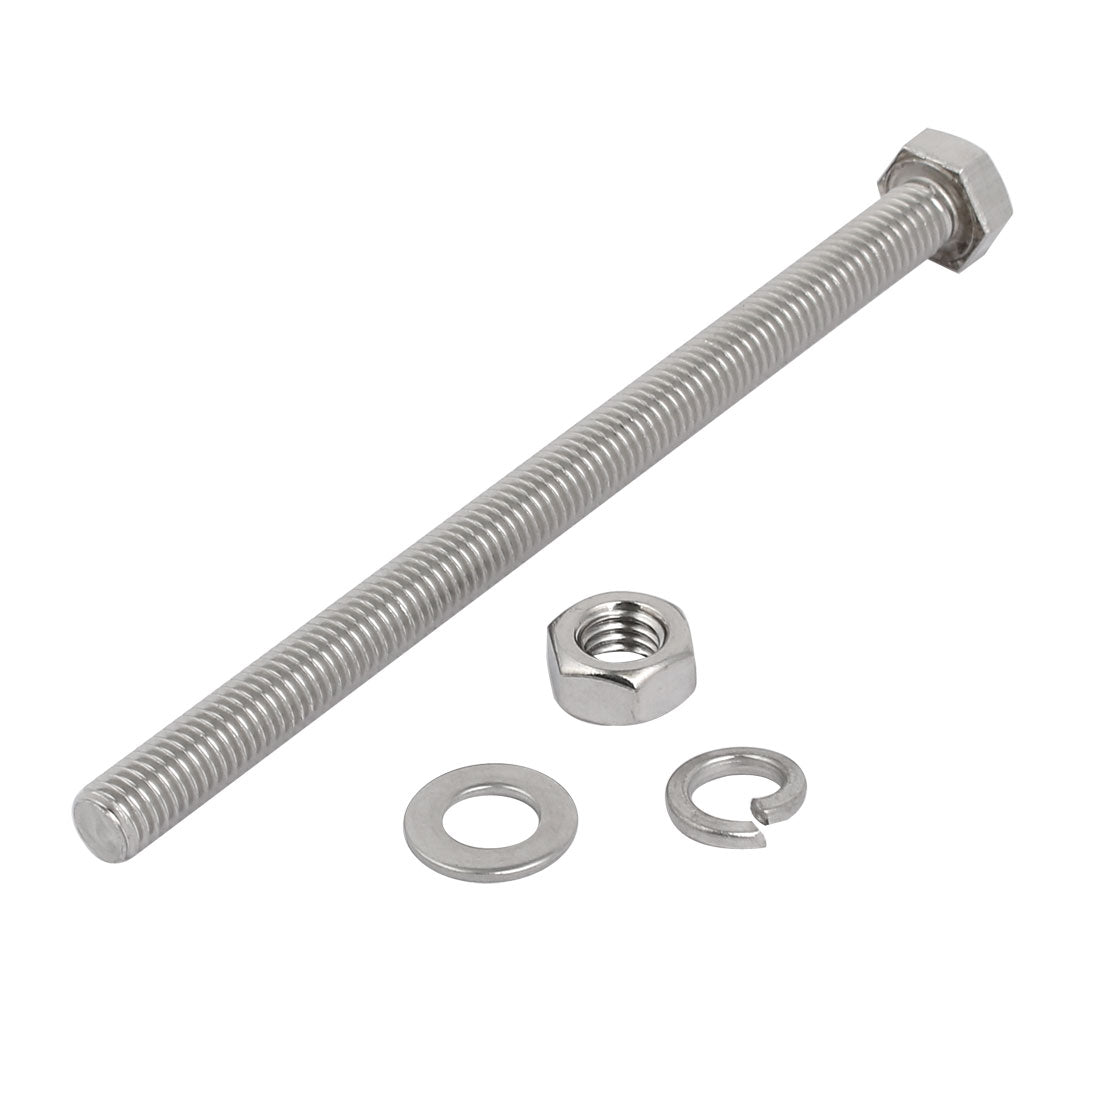 uxcell Uxcell 2 Set M8x130mm 304 Stainless Steel Hex Bolts w Nuts and Washers Assortment Kit